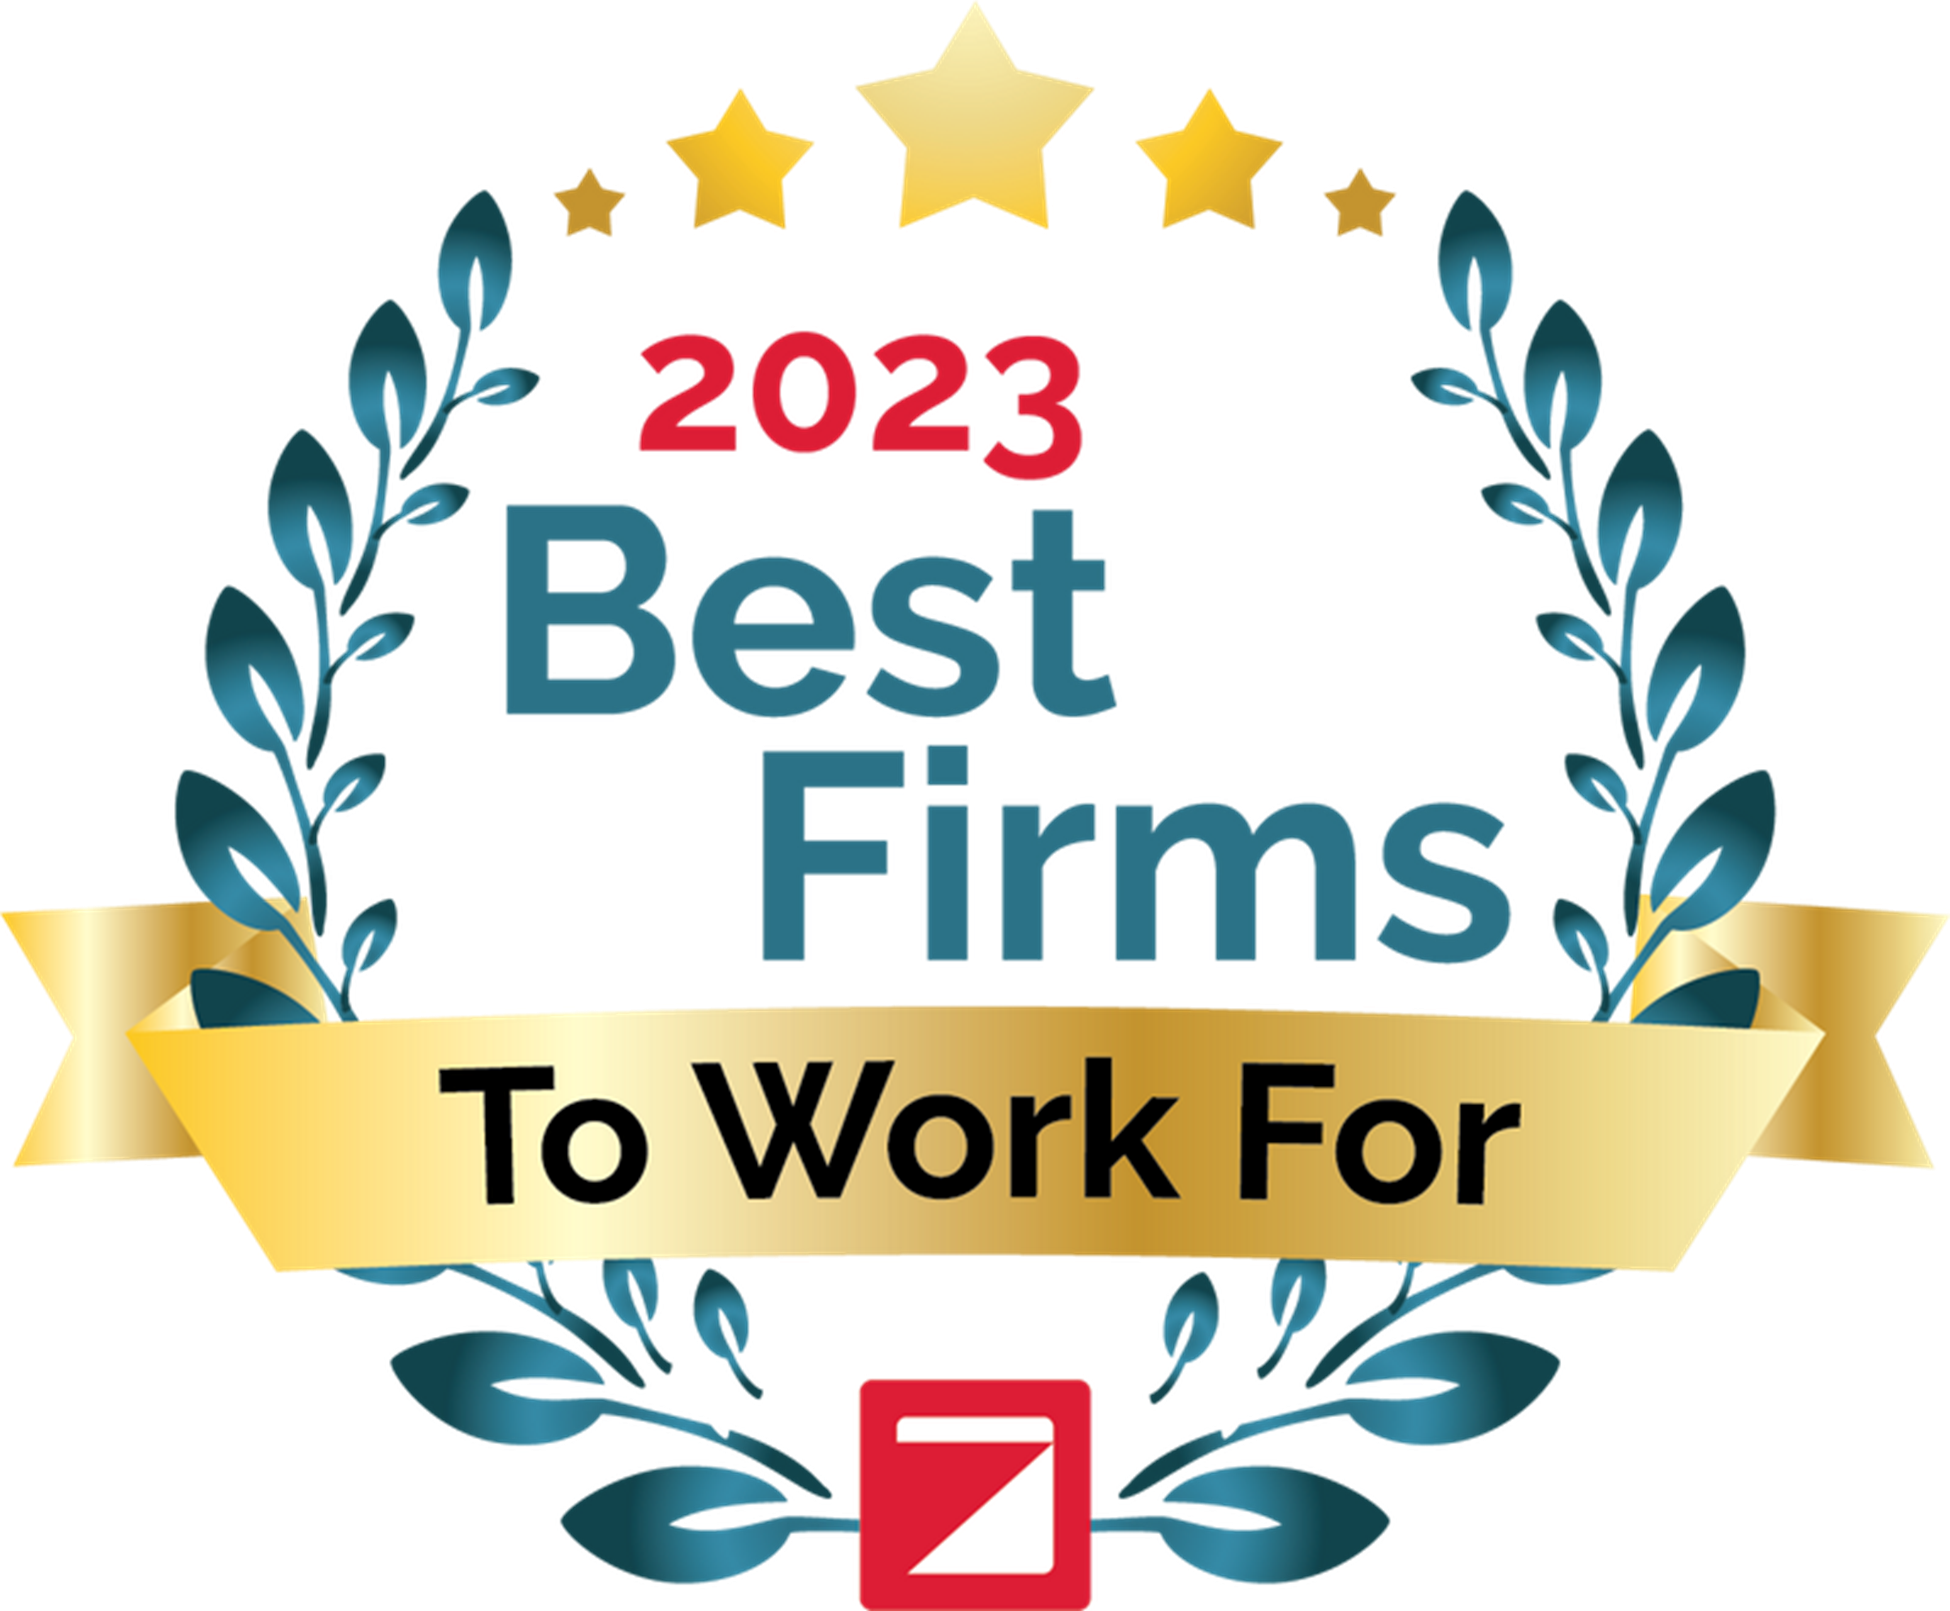 Selected as Best Firm to Work For 